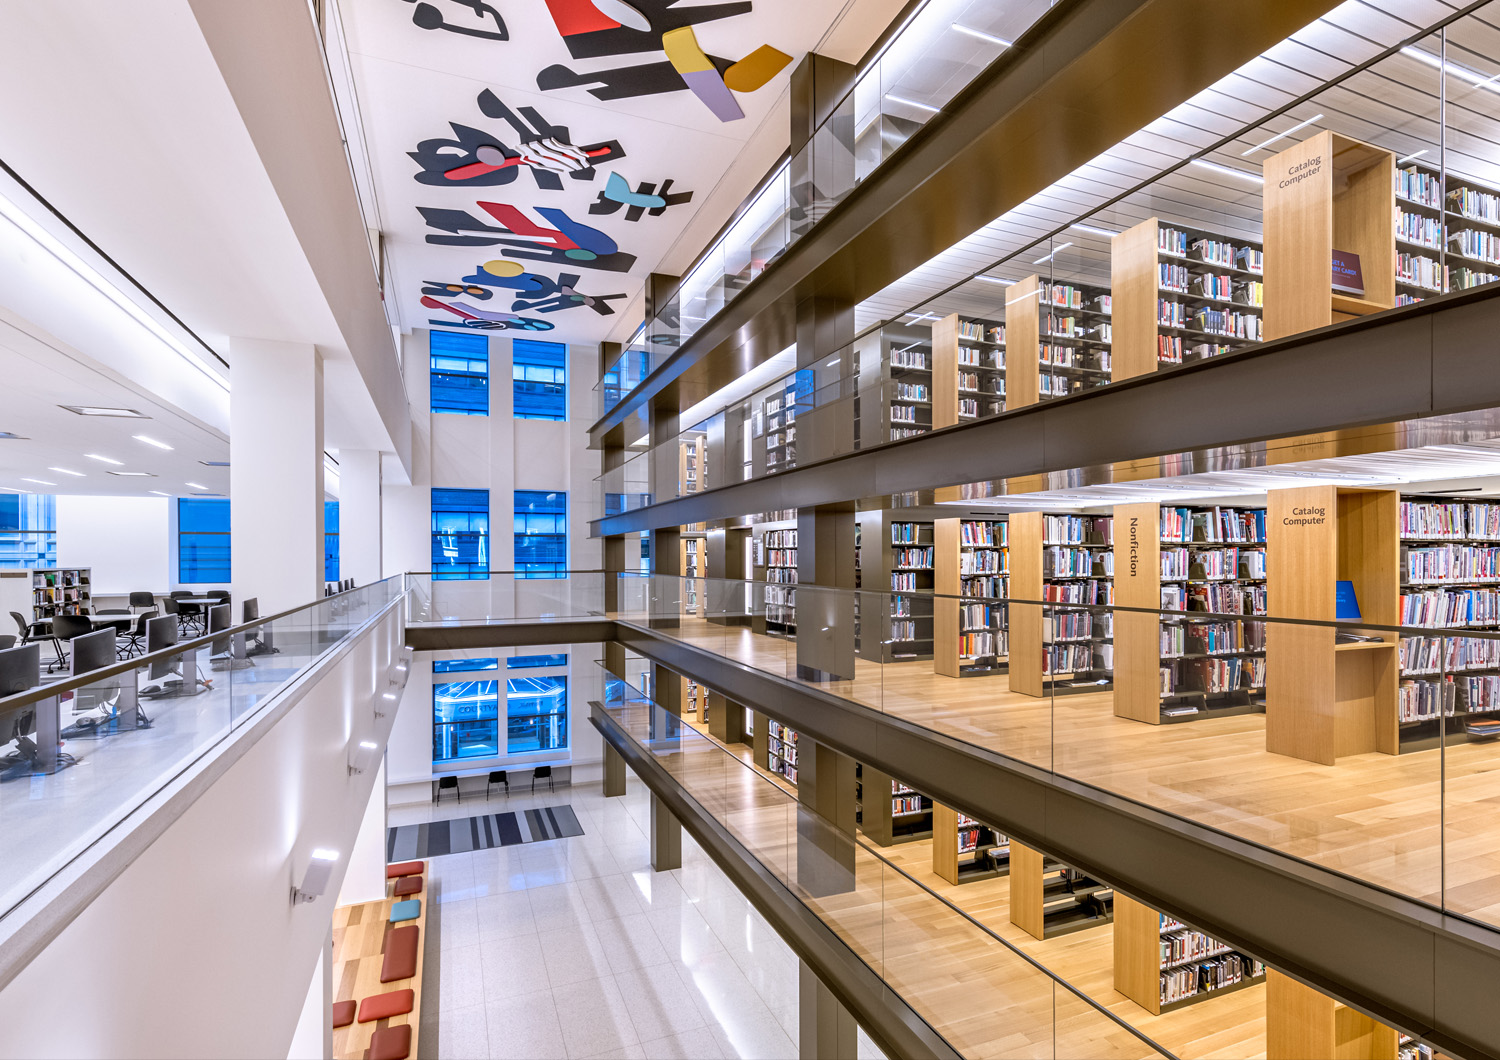 Reimagining the New York Public Library - Stavros Niarchos Foundation Library. video